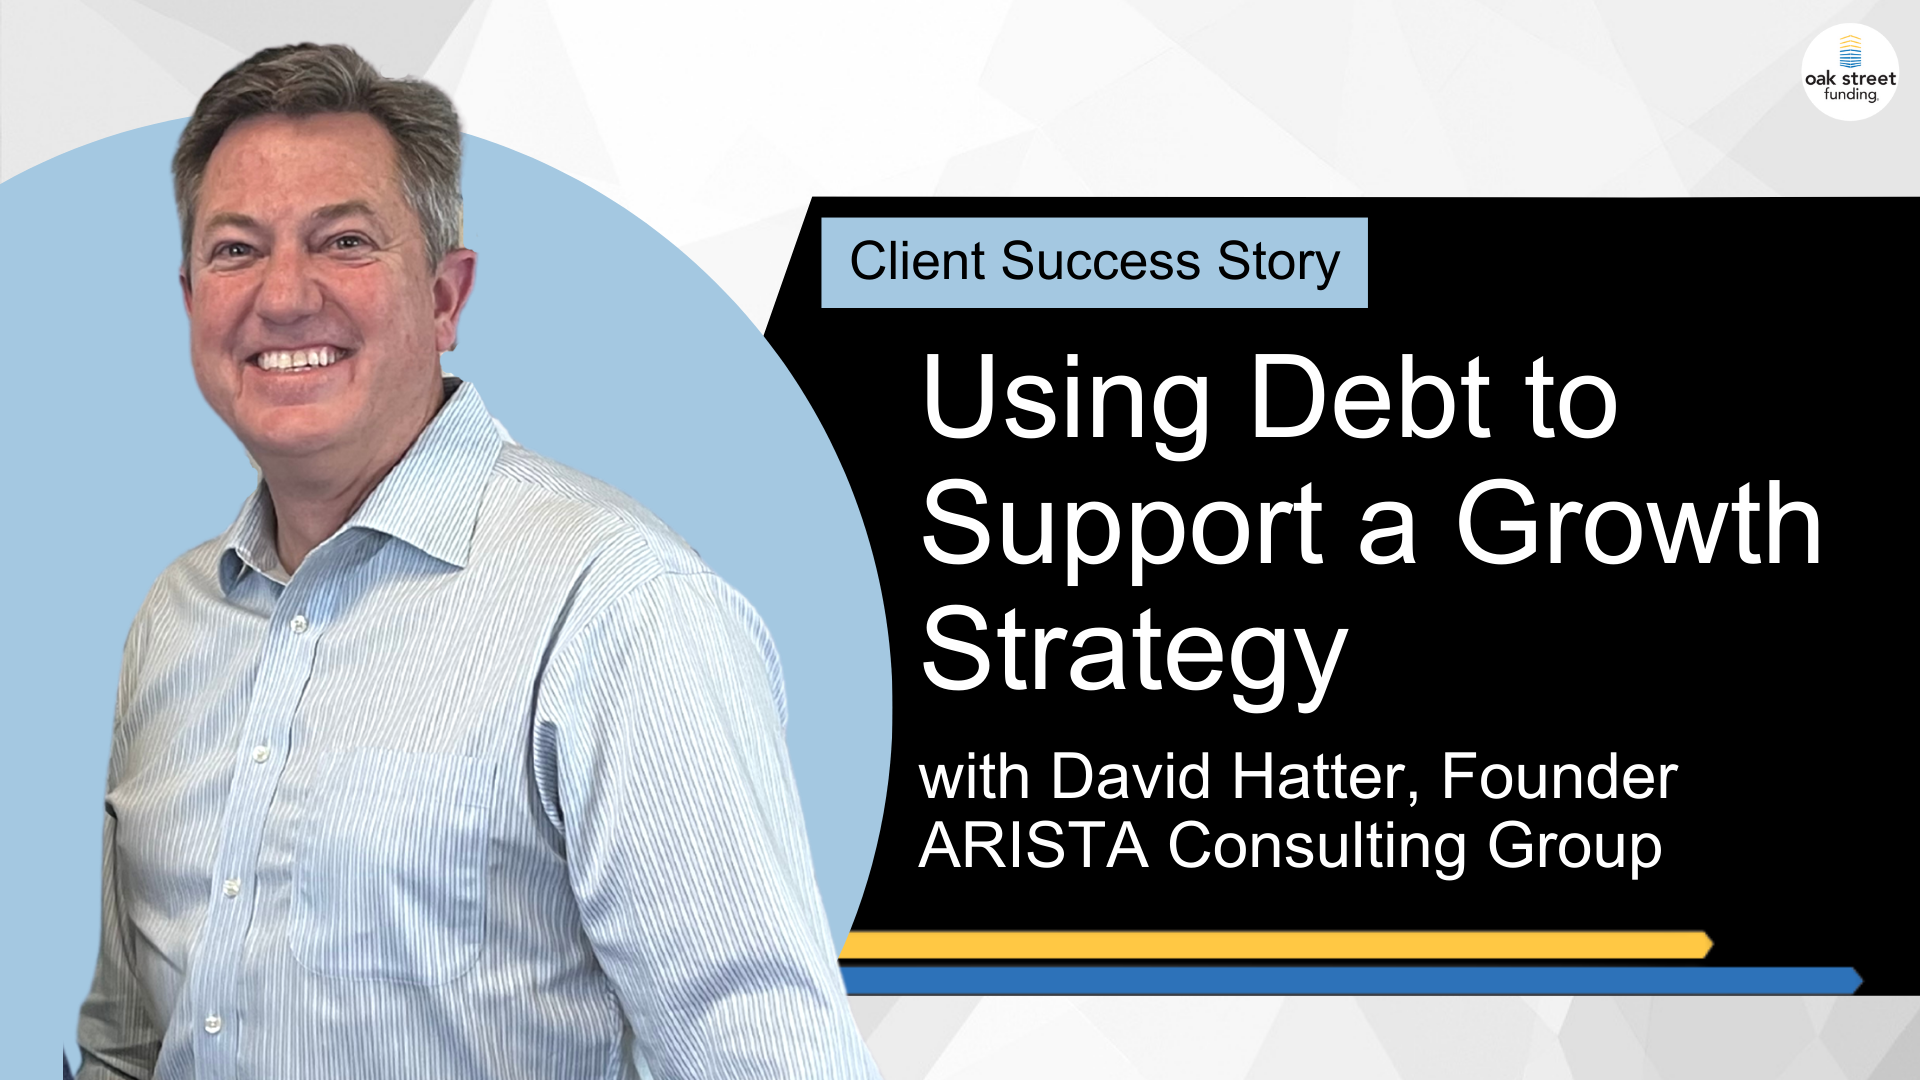 Client Success Story: Using Debt to Support a Growth Strategy